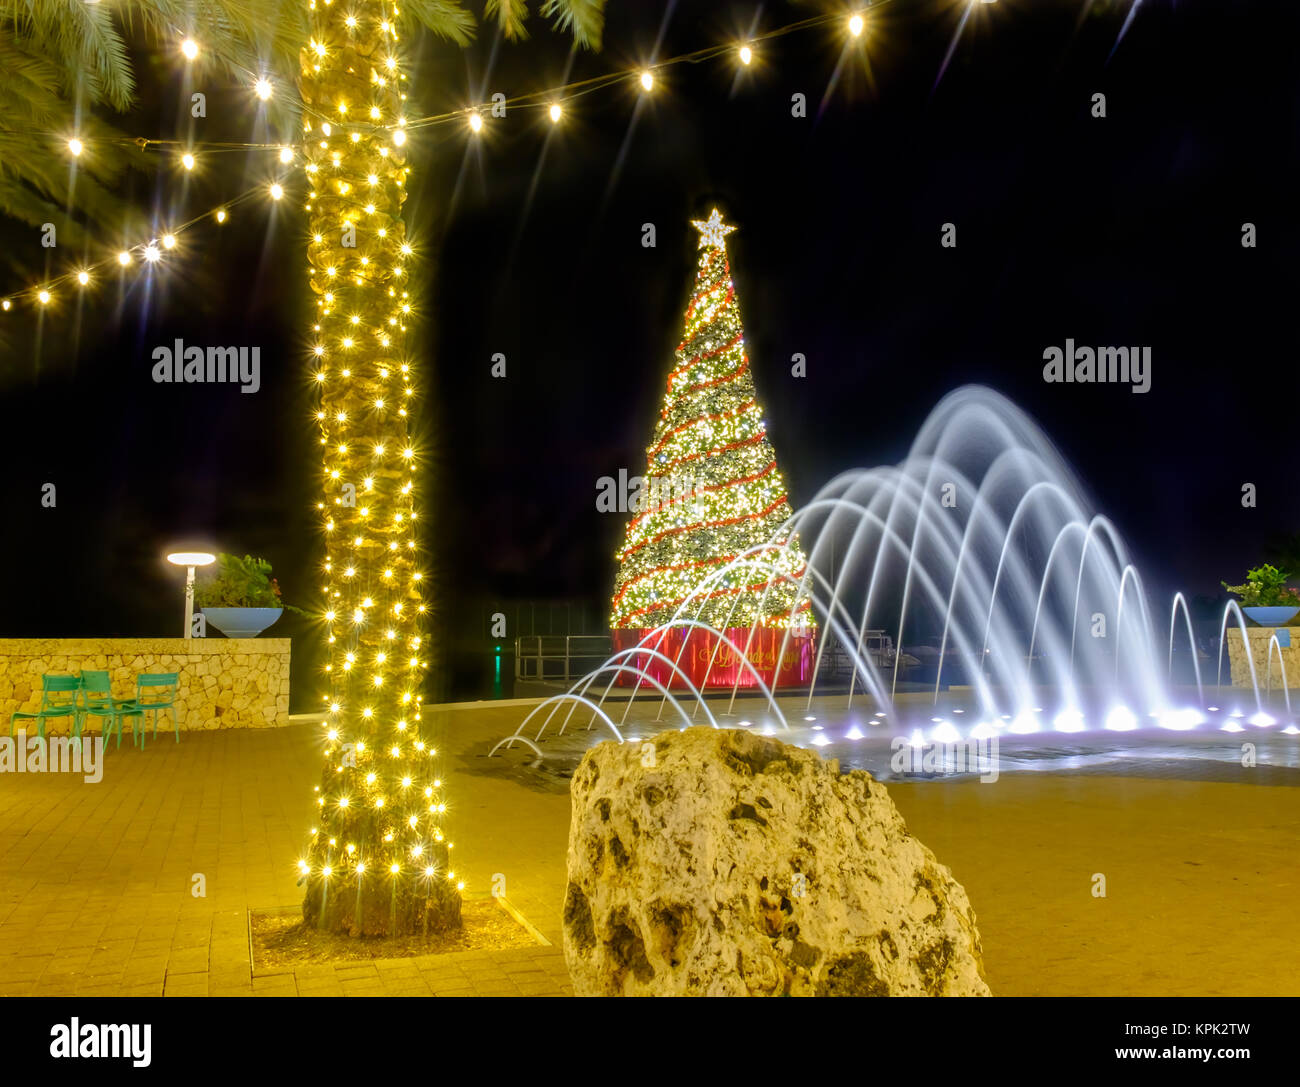 A Christmas tree, a water fountain and an illuminated palm tree with strip lights on a pedestrian street of Camana Bay, Grand Cayman, Cayman Islands Stock Photo